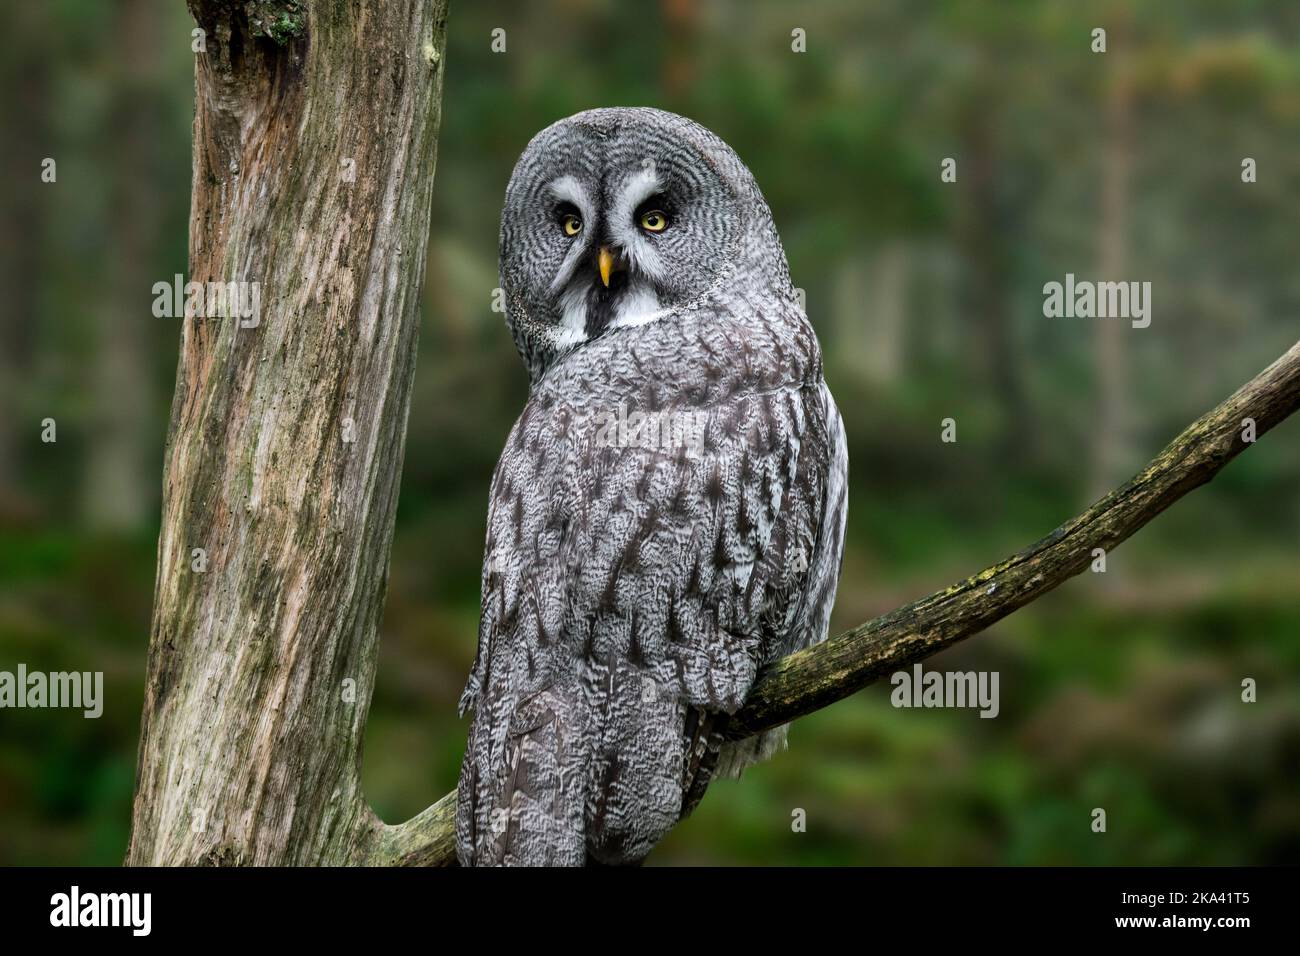 Great grey owl / great gray owl (Strix nebulosa) perched in tree in coniferous forest, native to North America, Finland, Estonia and northern Asia Stock Photo